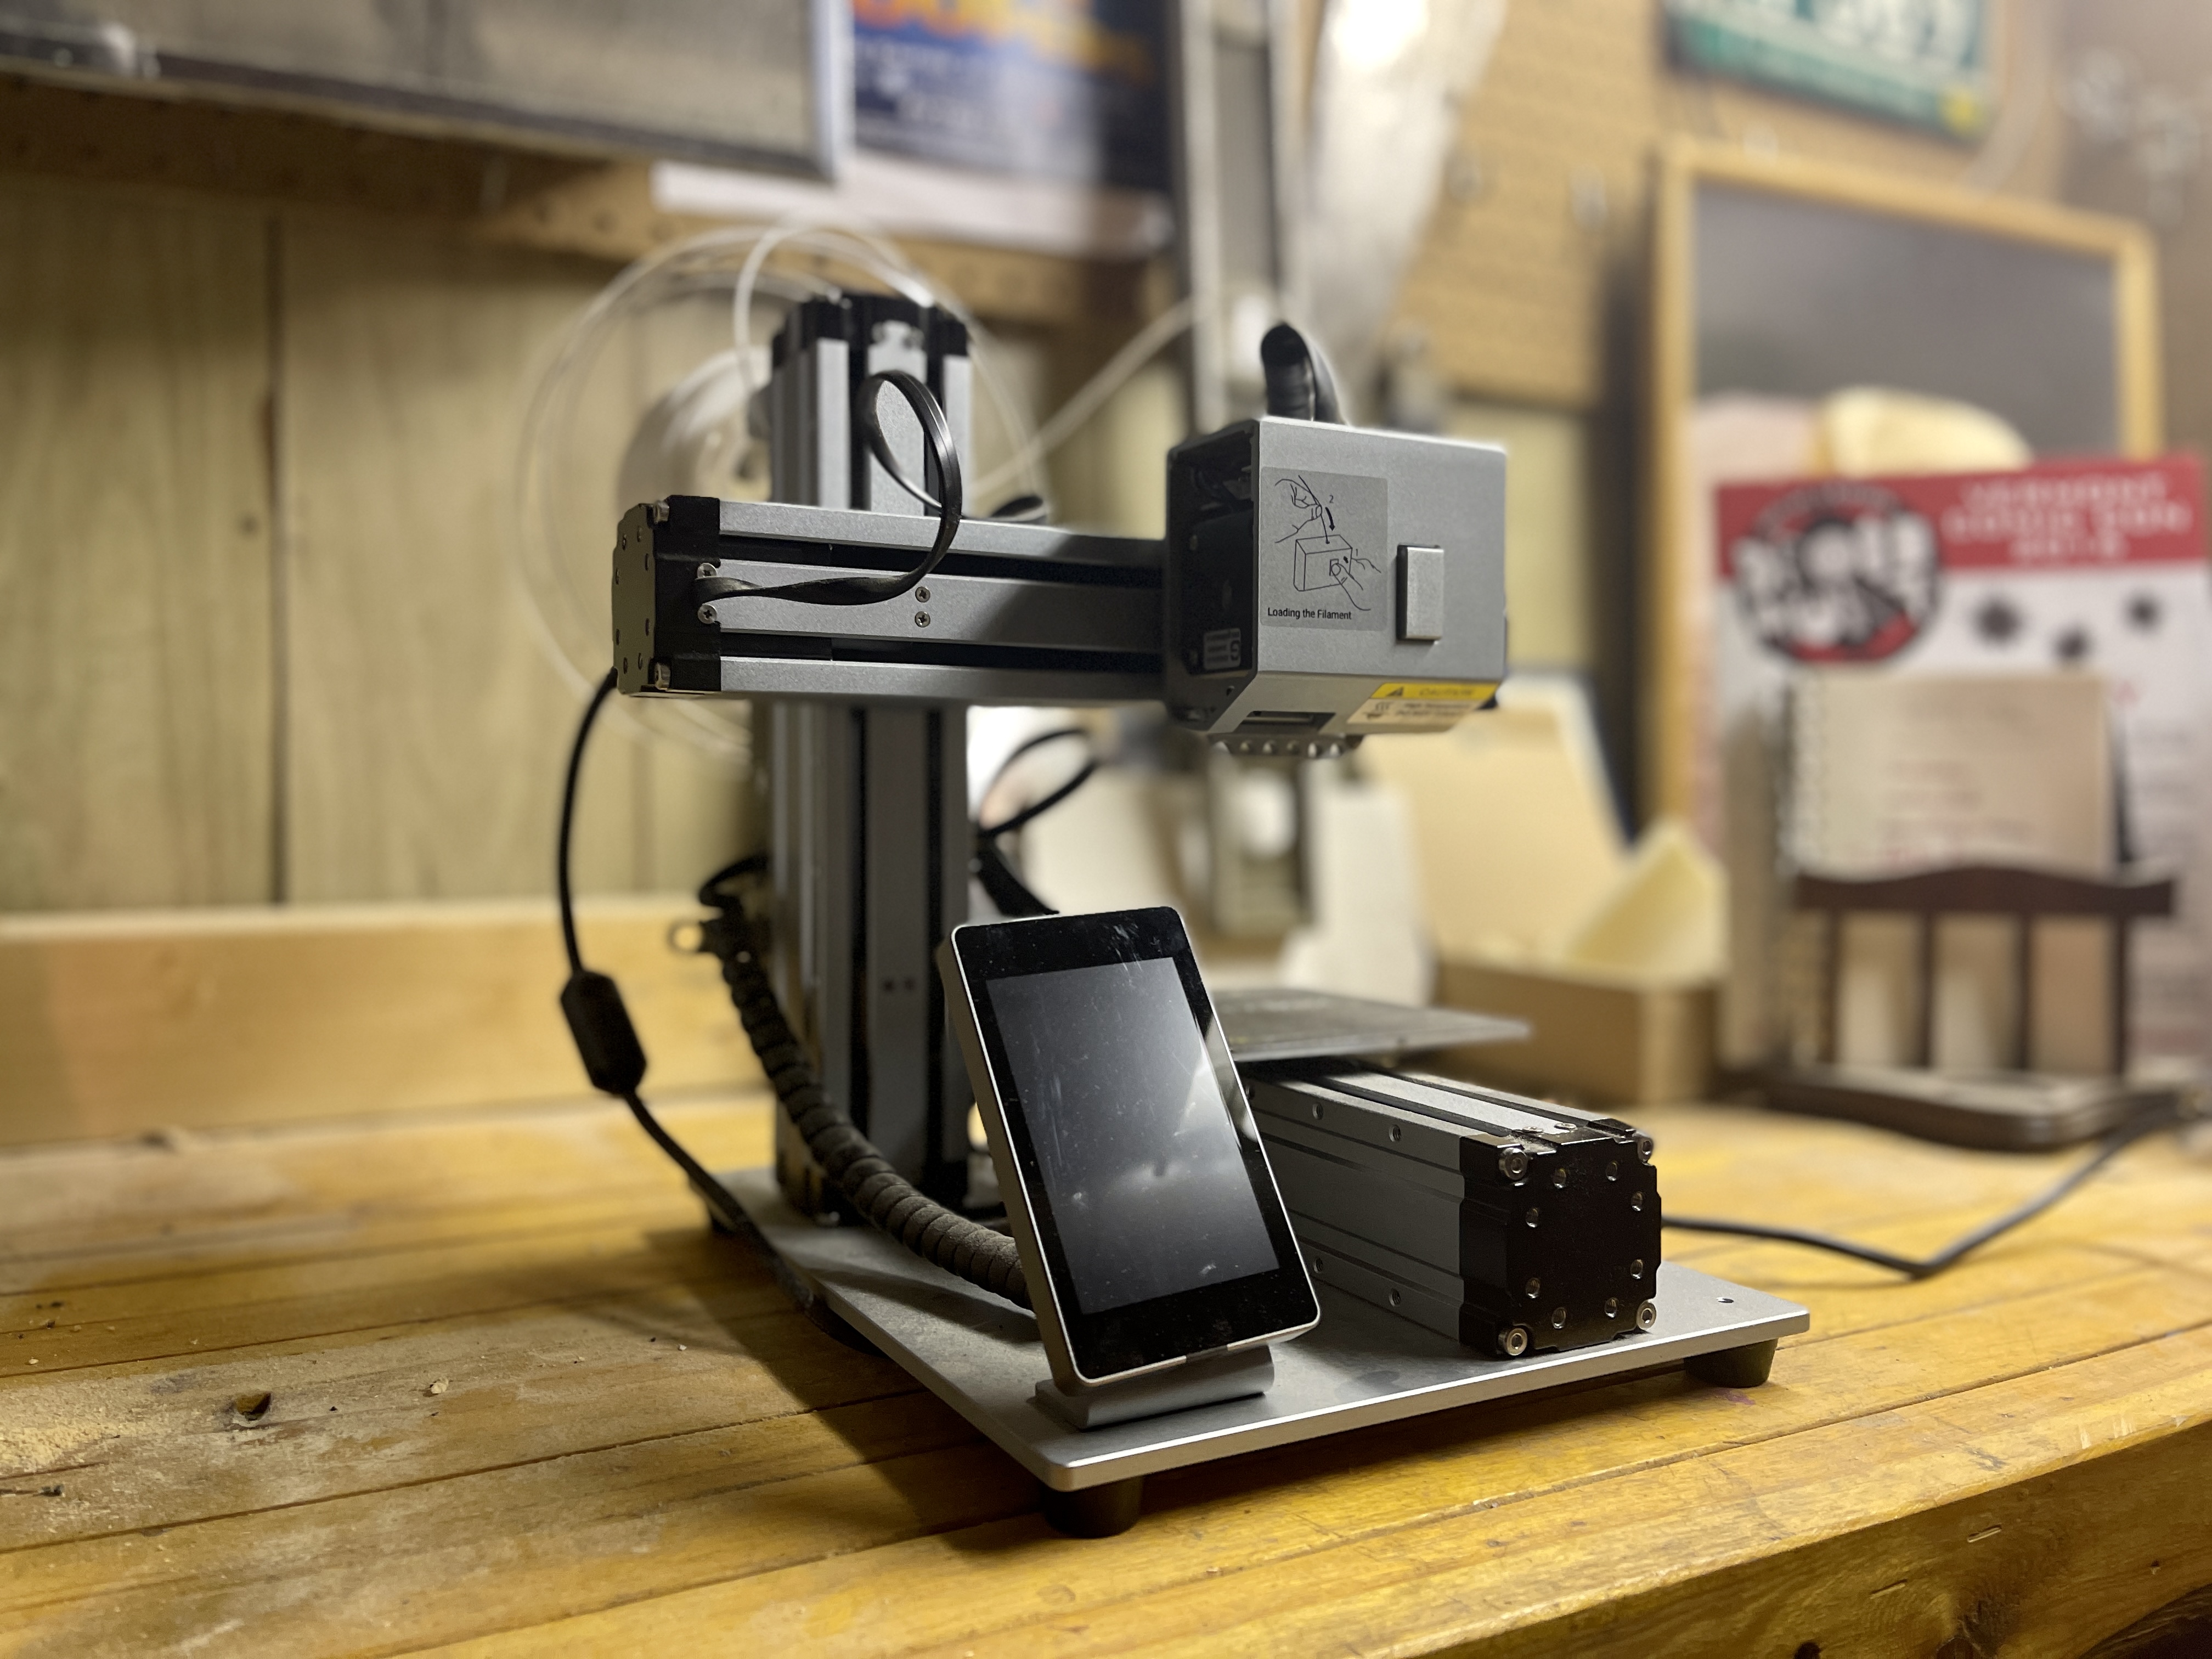 My personal 3D printer: a Snapmaker, which I've used to print a variety of parts for  costumes. The expiration of 3D-printing patents has helped the home-printer market explode.  